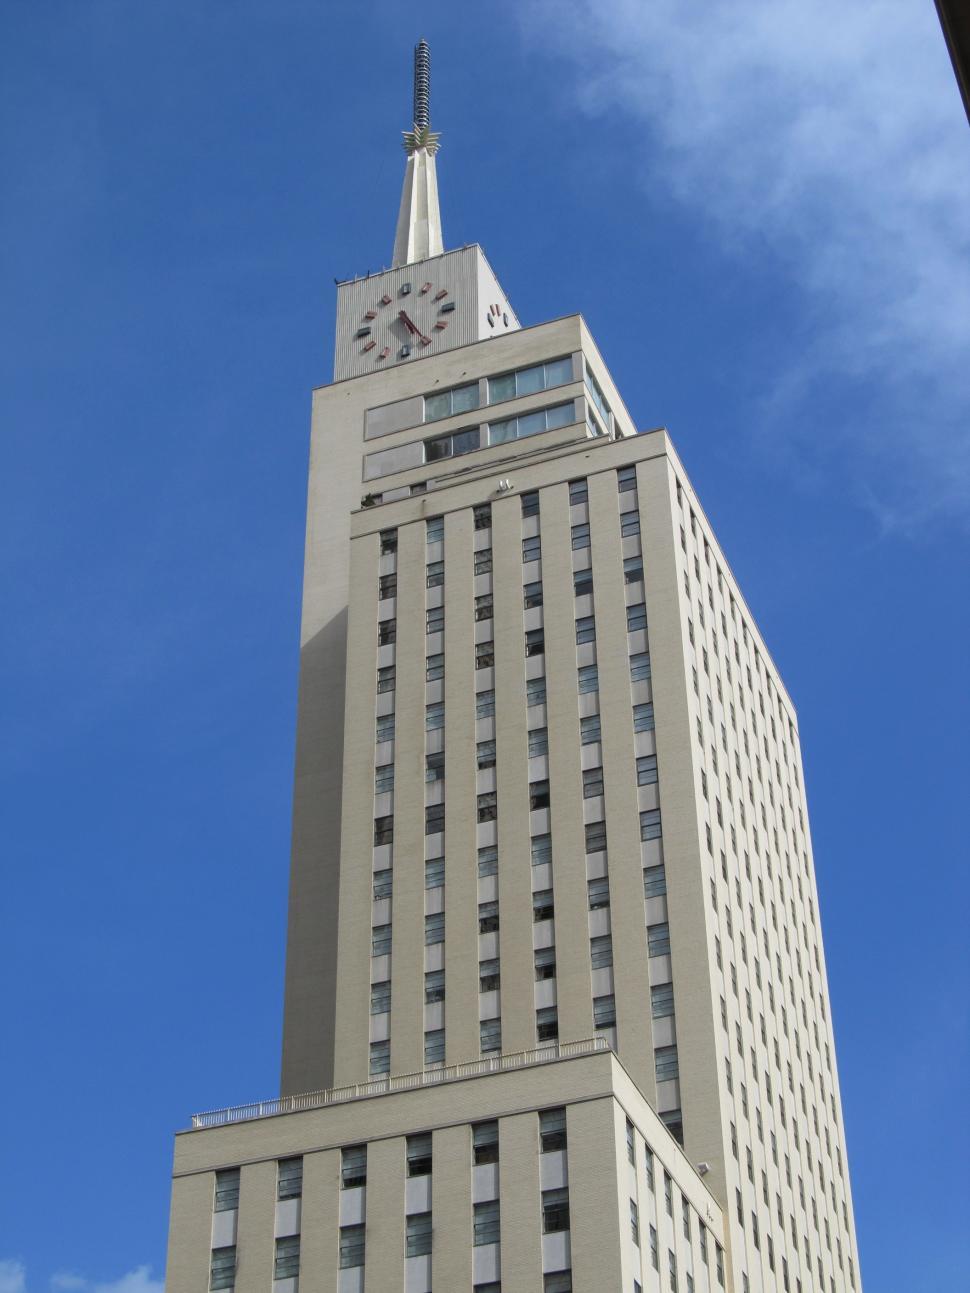 Free Image of Tall Building With Clock At the Top 